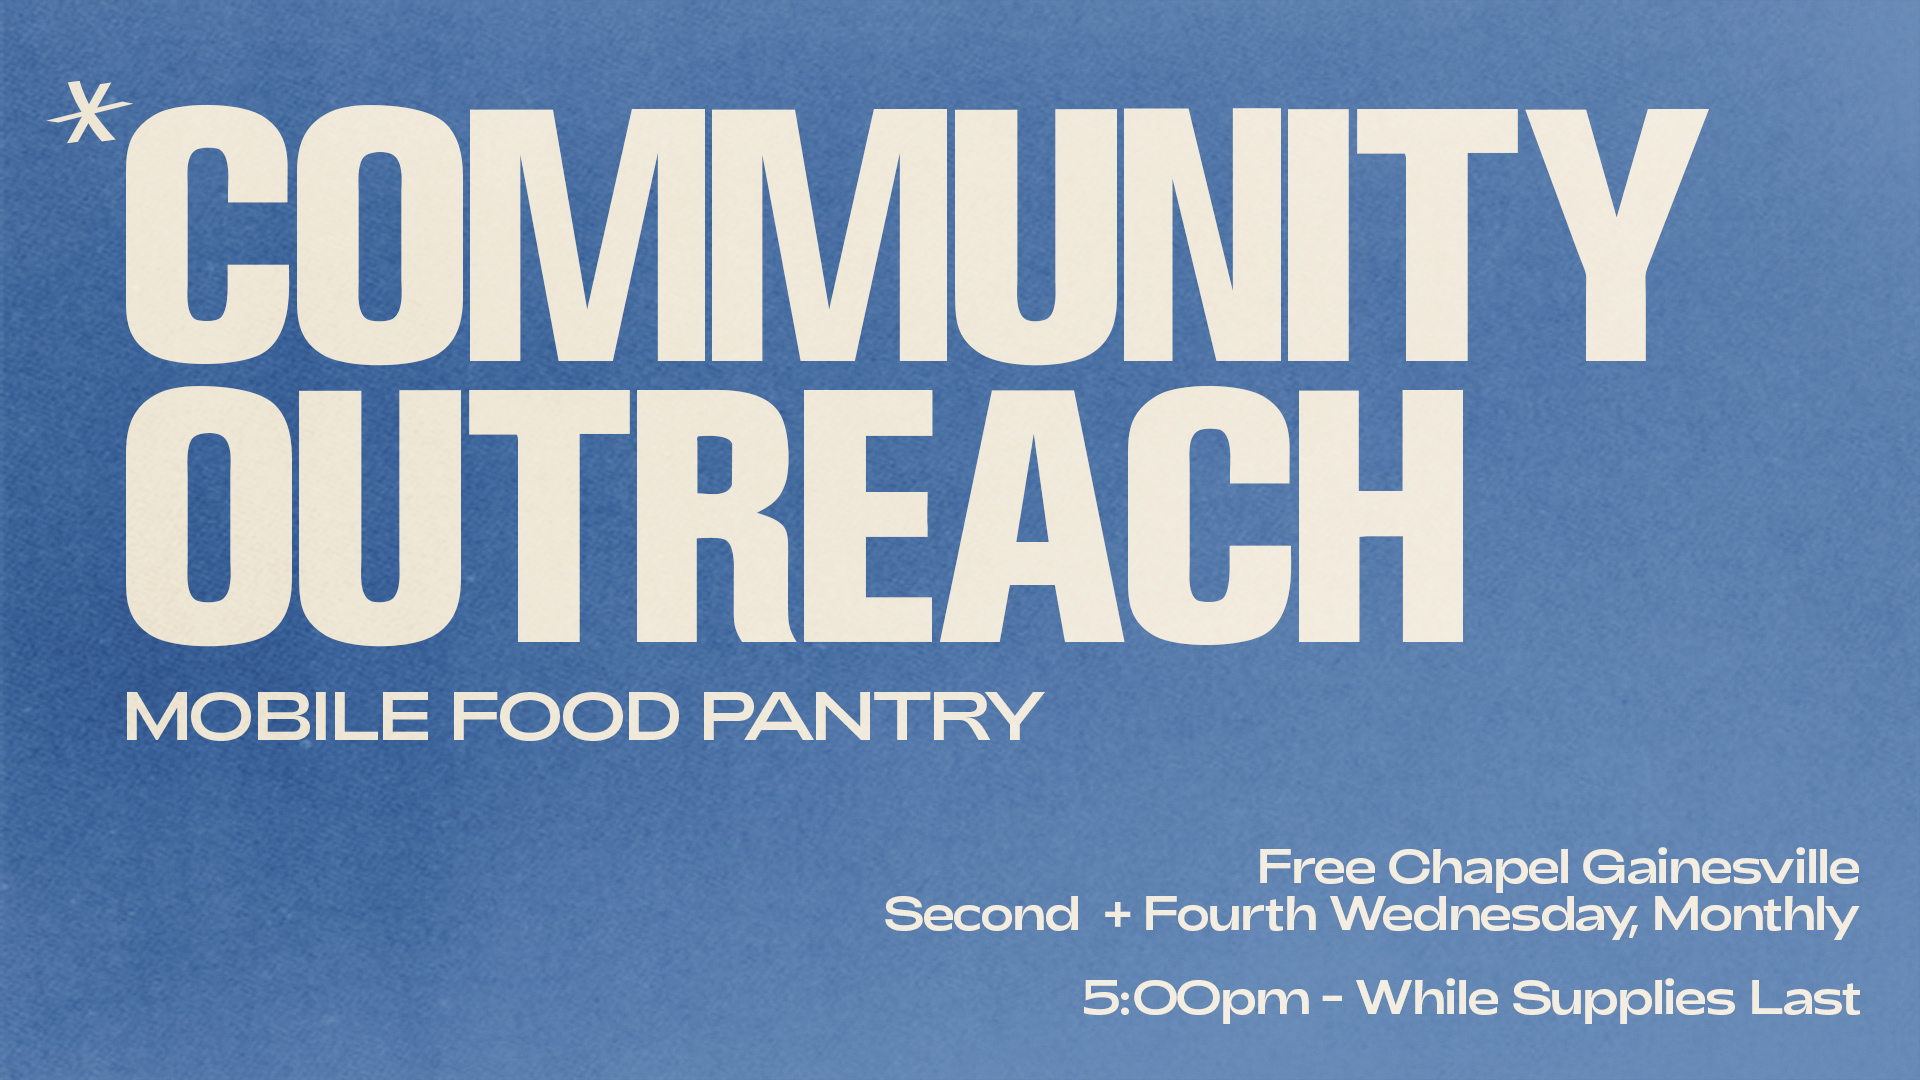 Community Outreach: Mobile Food Pantry at the Gainesville campus